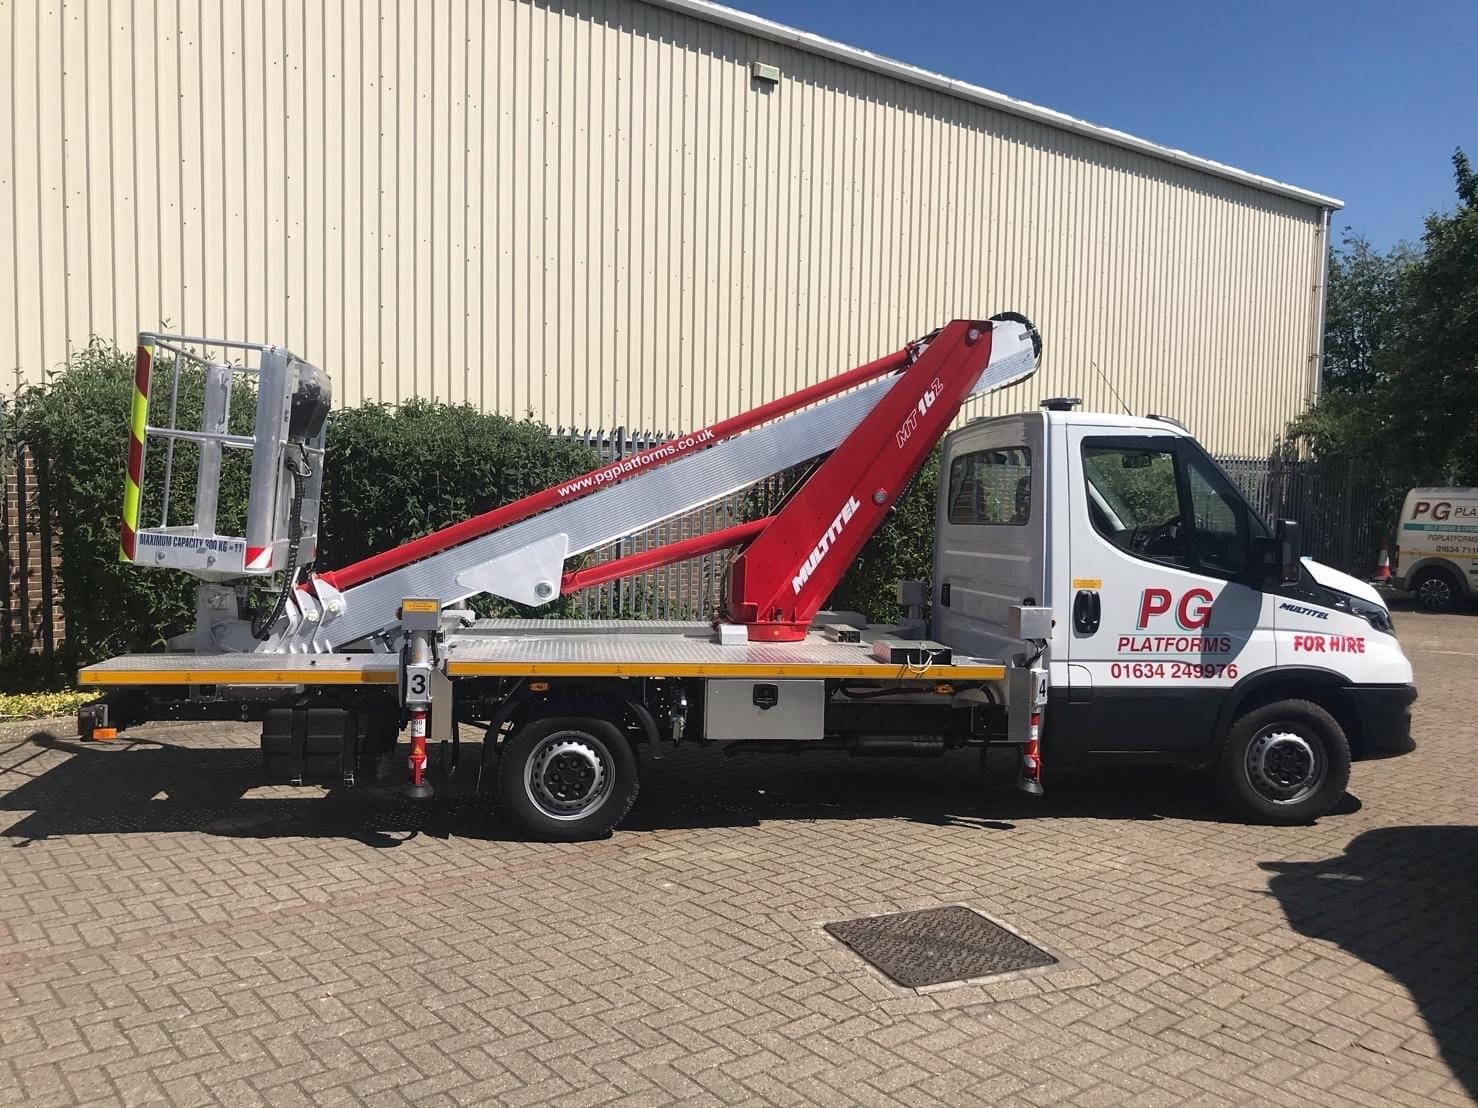 Multitel MT162EX vehicle mounted lift hire from PG Platforms